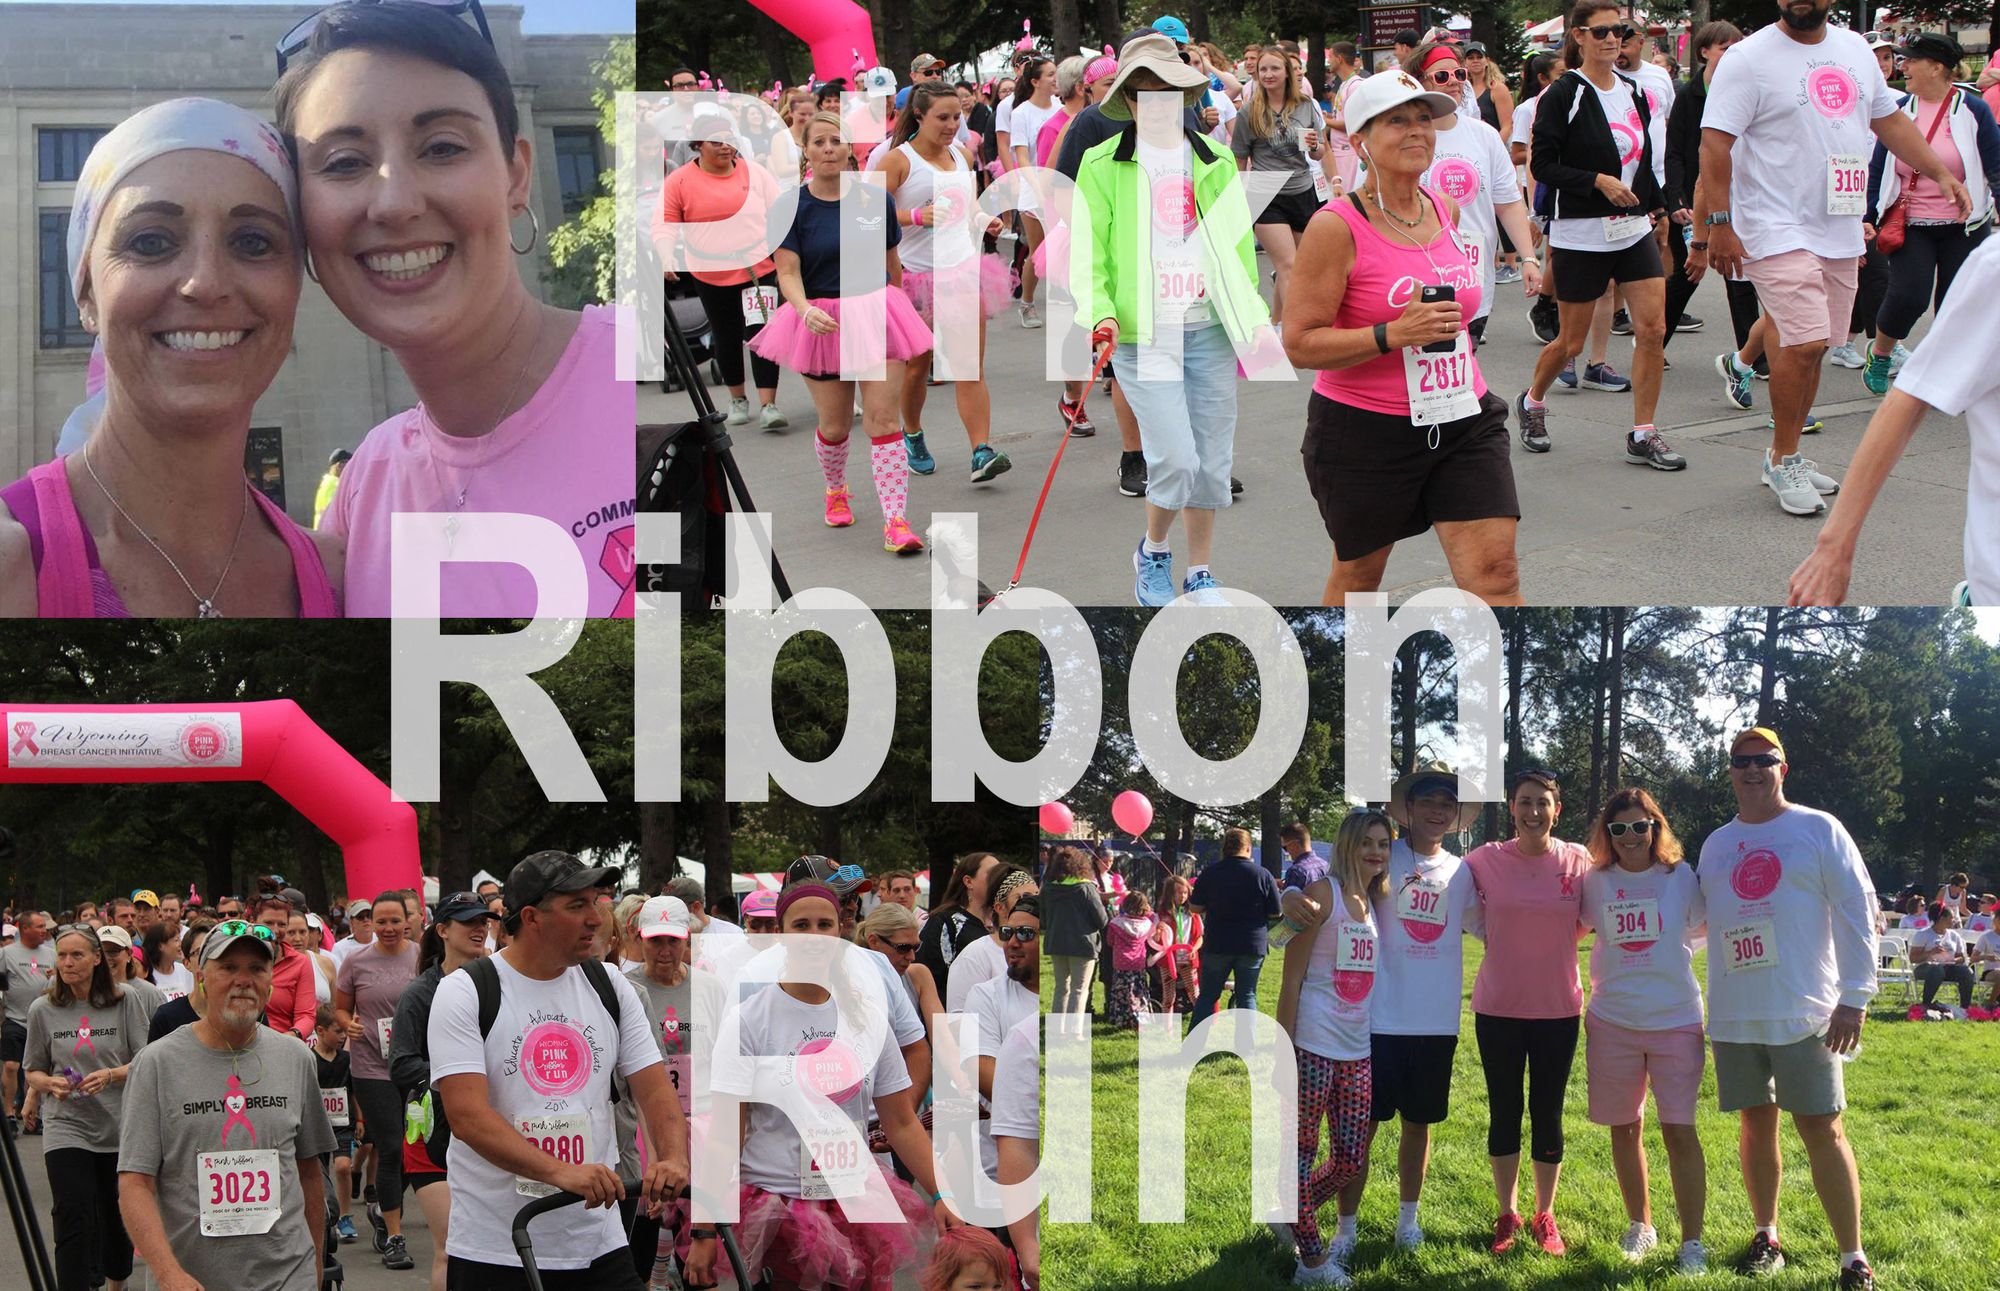 Join In On The Fun At The Pink Ribbon Run